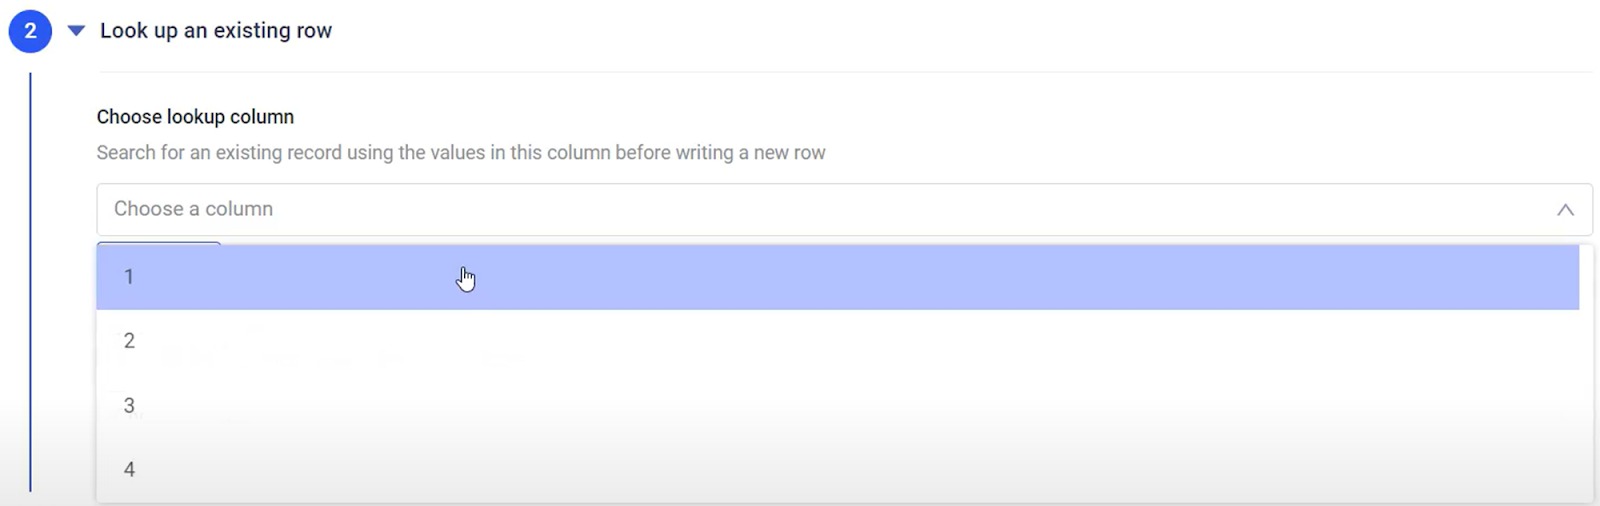 Choosing columns within an existing spreadsheet linked to your Google account.